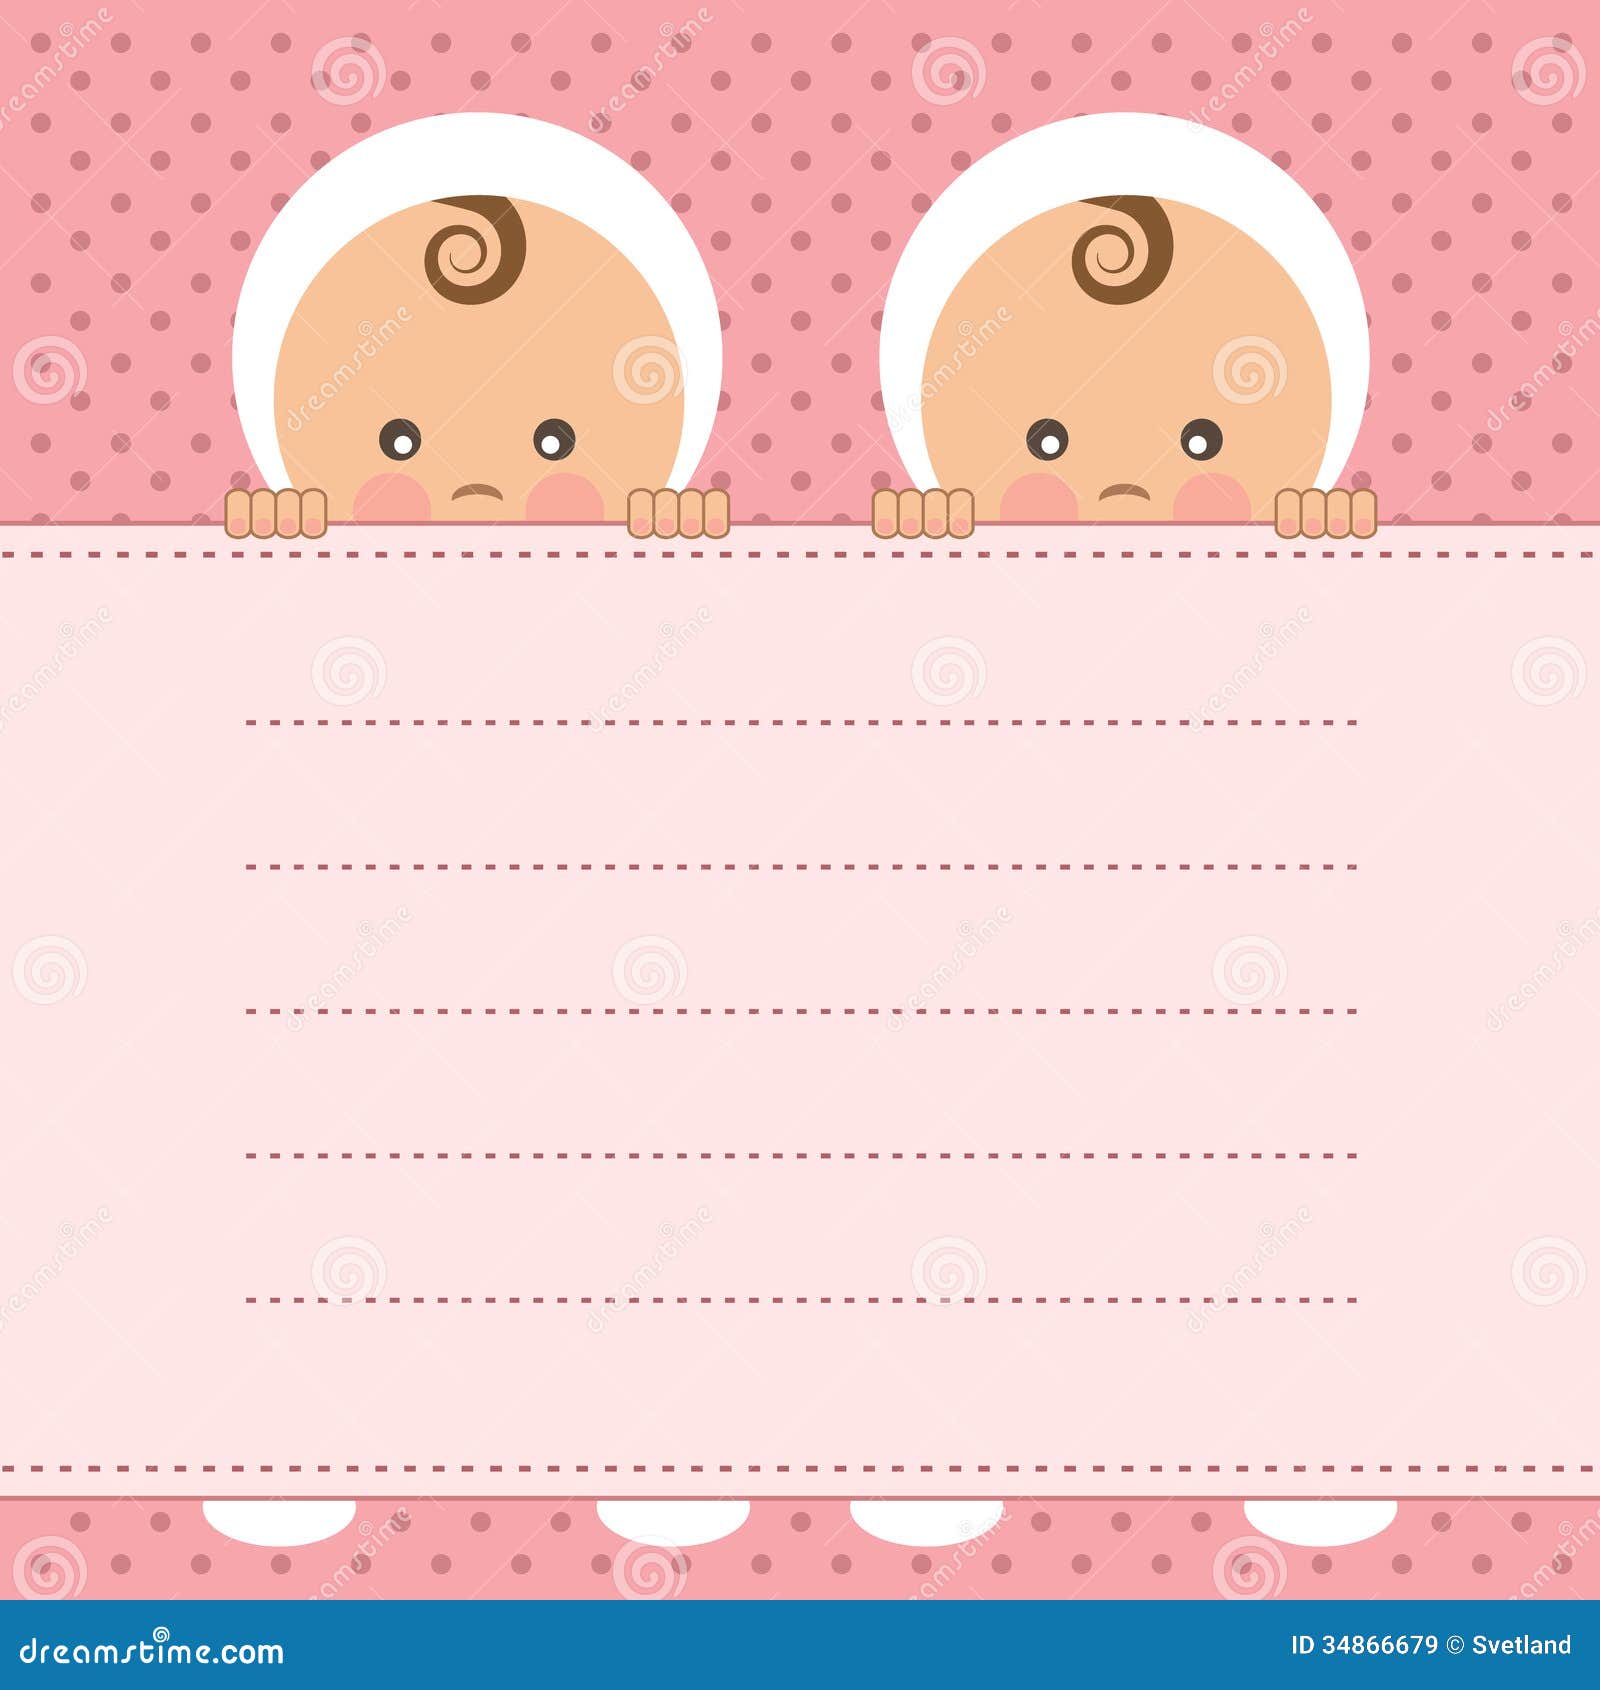 clipart baby cards - photo #15